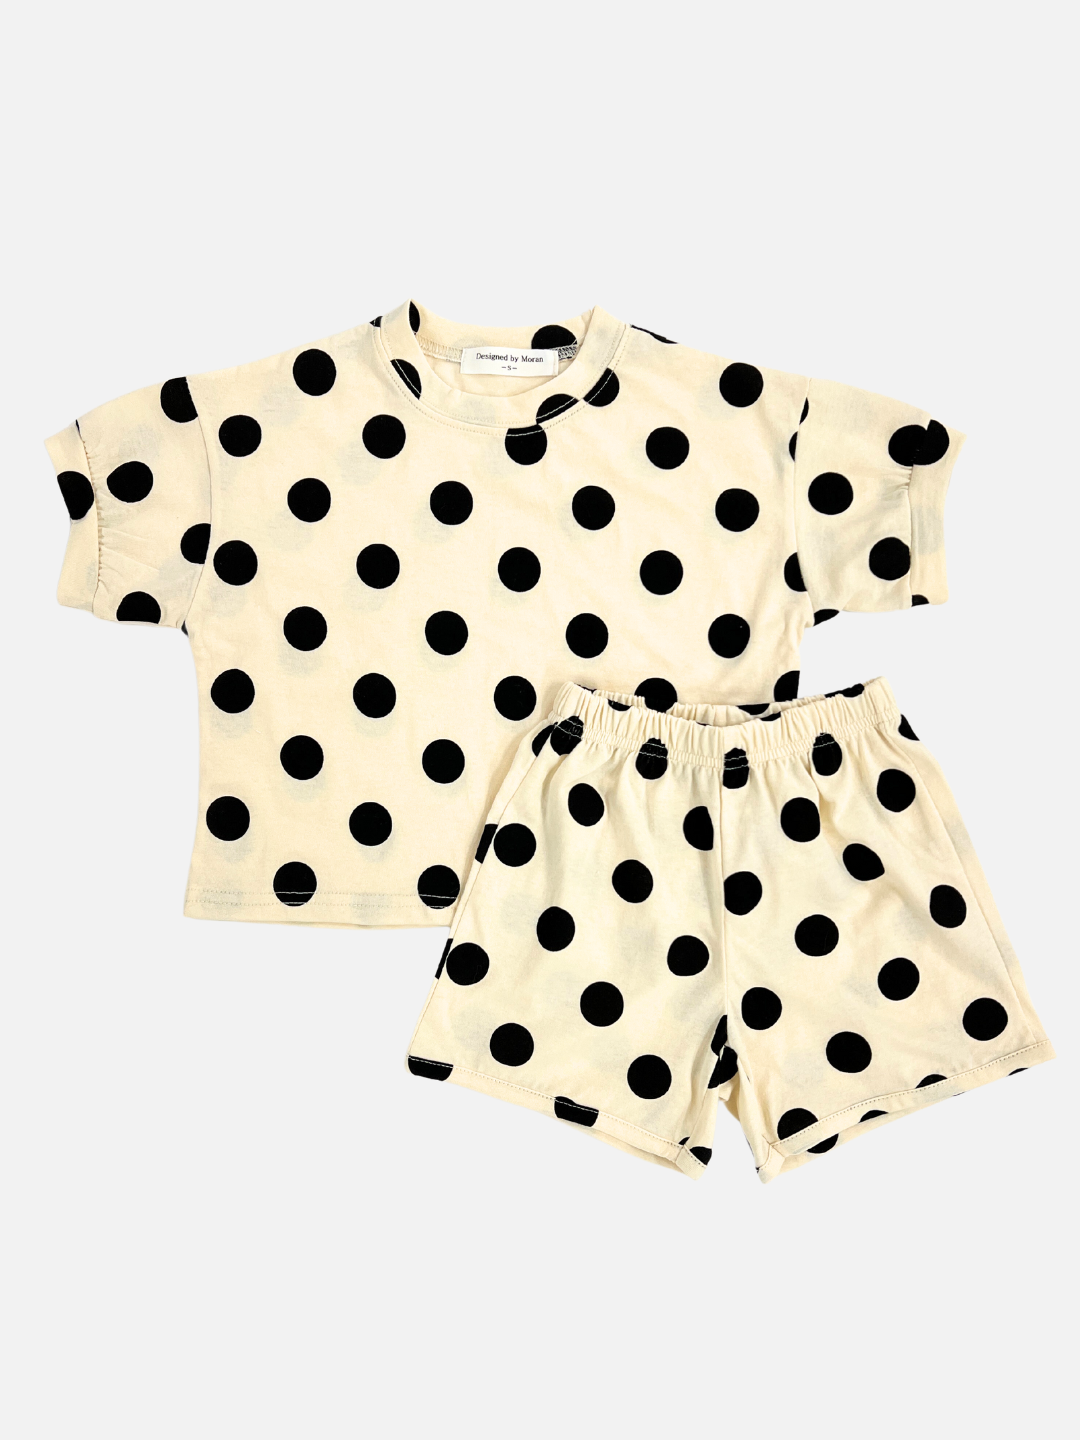  A kids' tee shirt and shorts set in a pattern of black dots on an ecru background